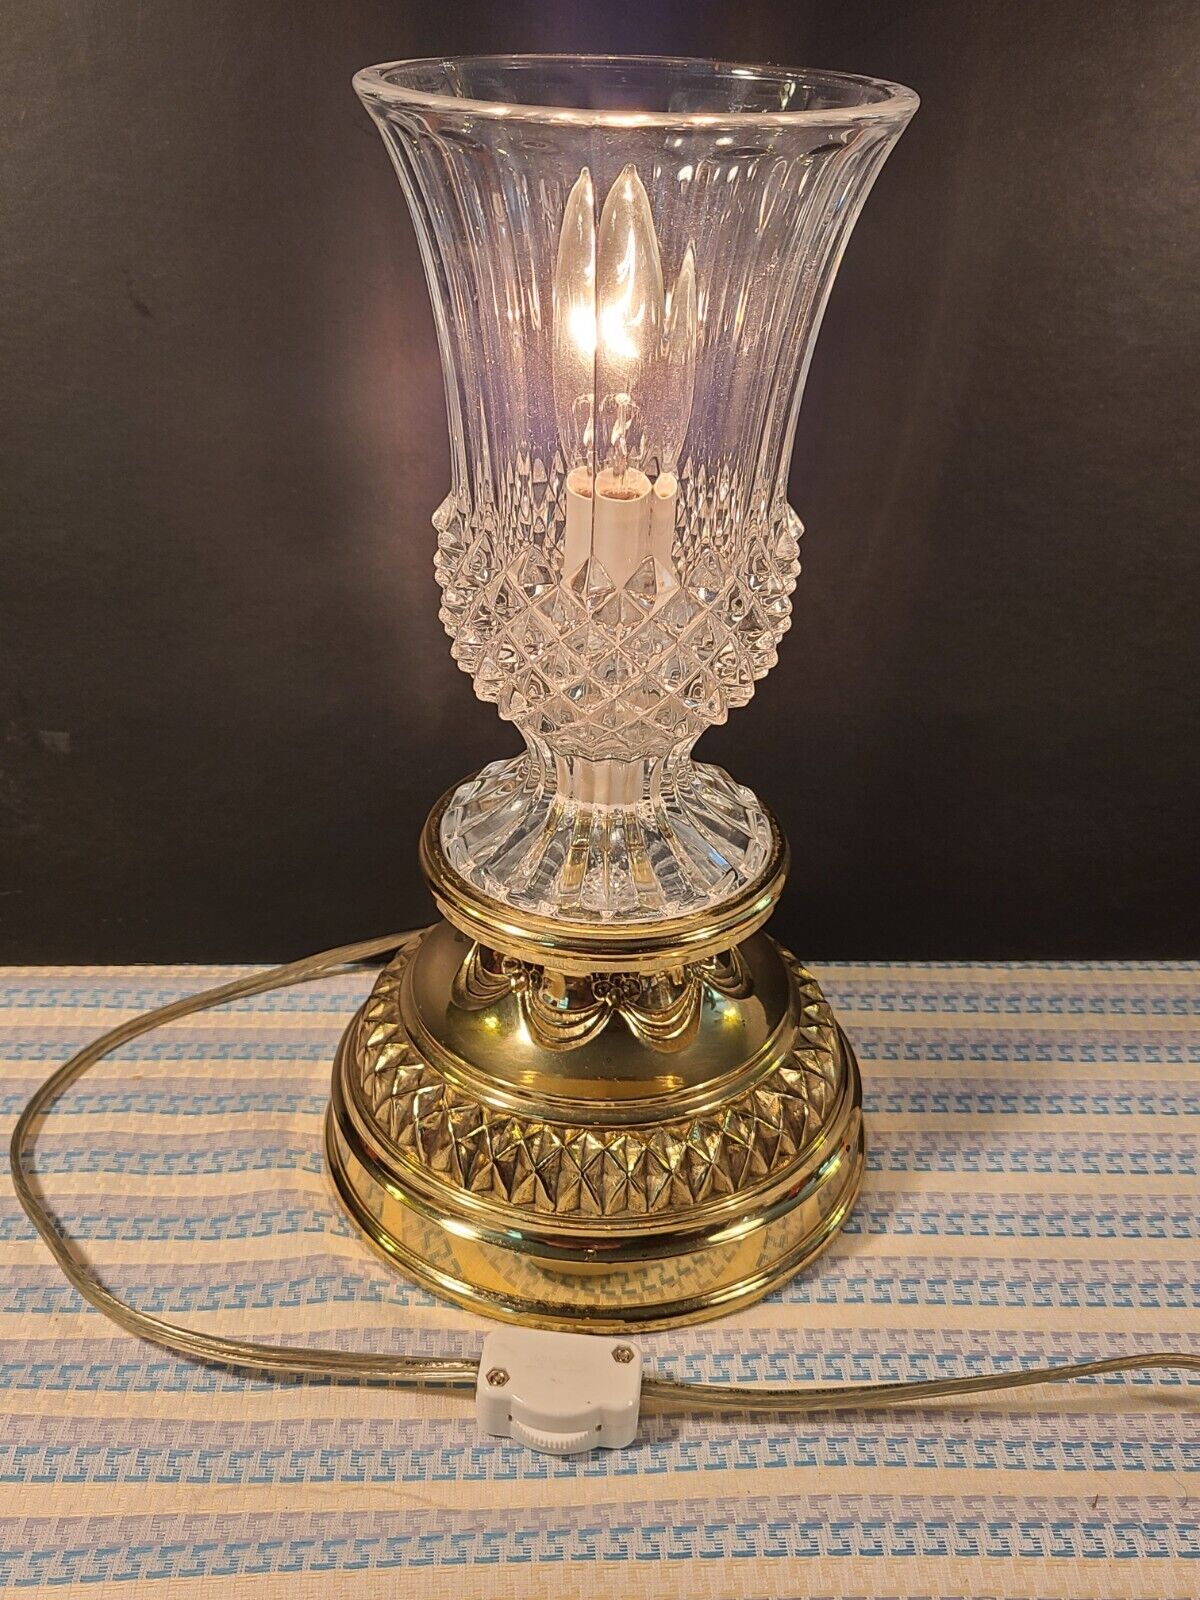 Stiffel Table Lamp Brass & Crystal 2 Way Switch Lamp - 10¾ Inches